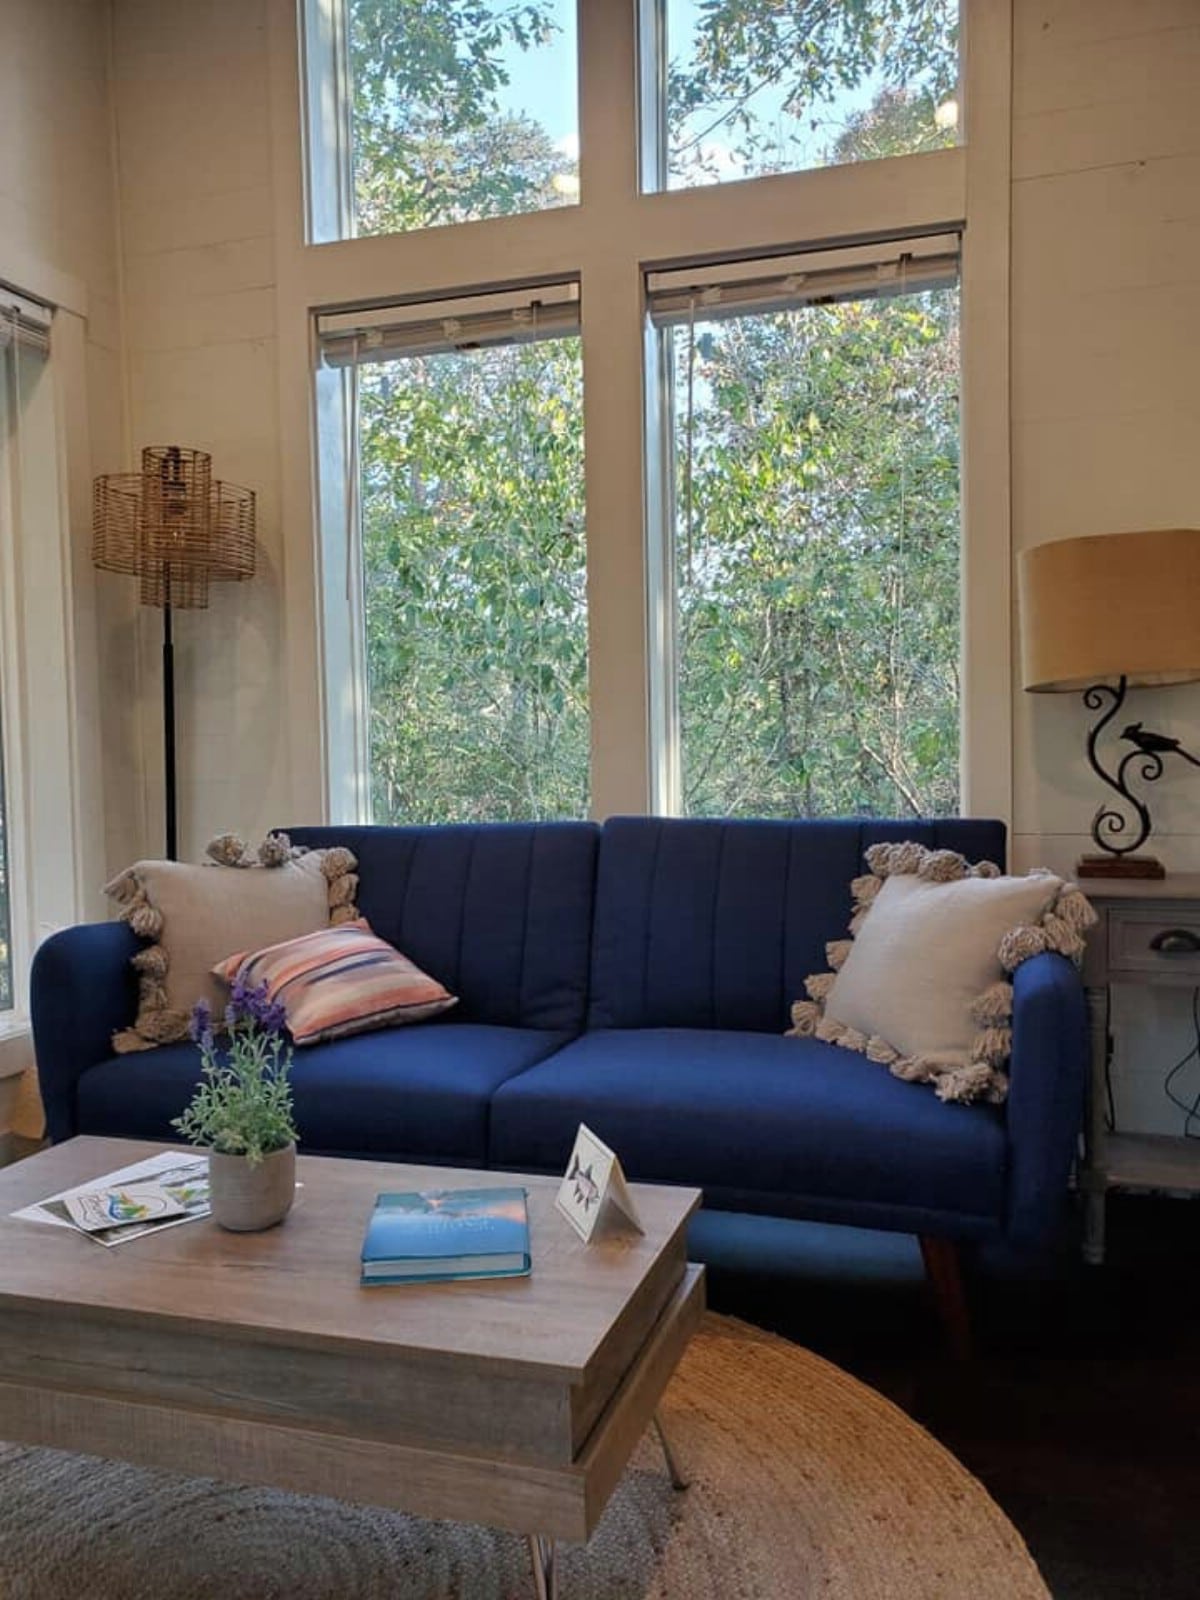 Couch in front of windows